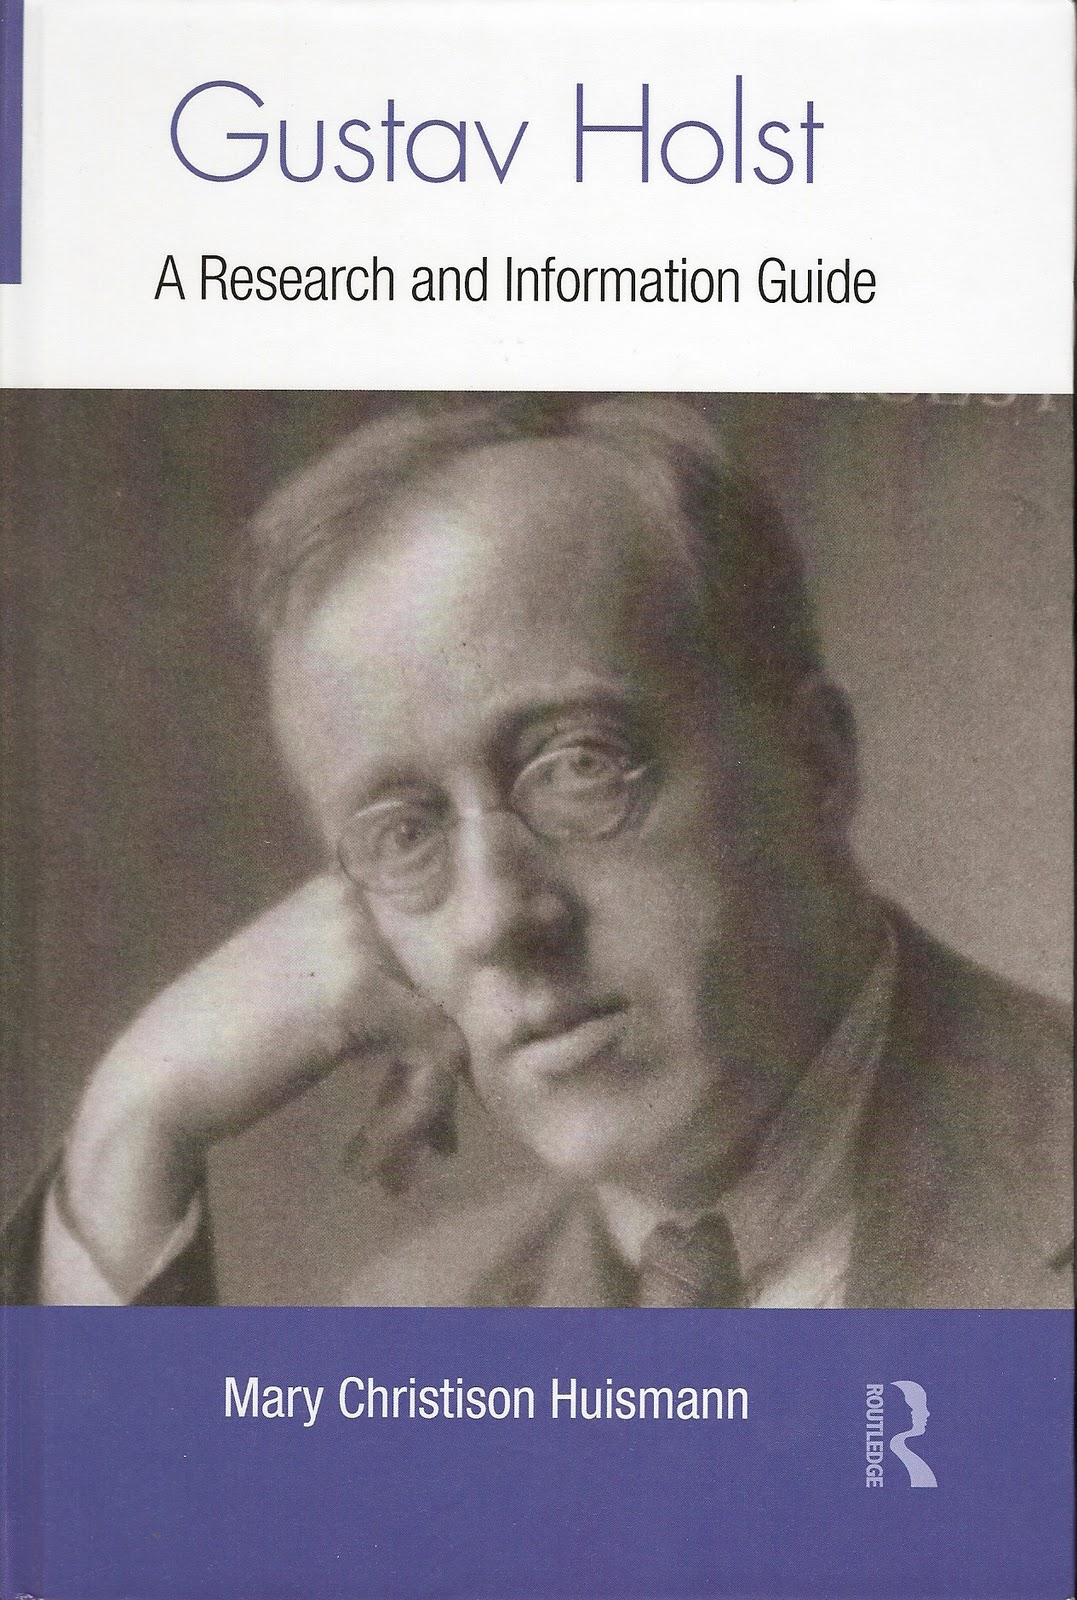 Order essay online cheap The Life and Works of English Composer, Gustav Holst